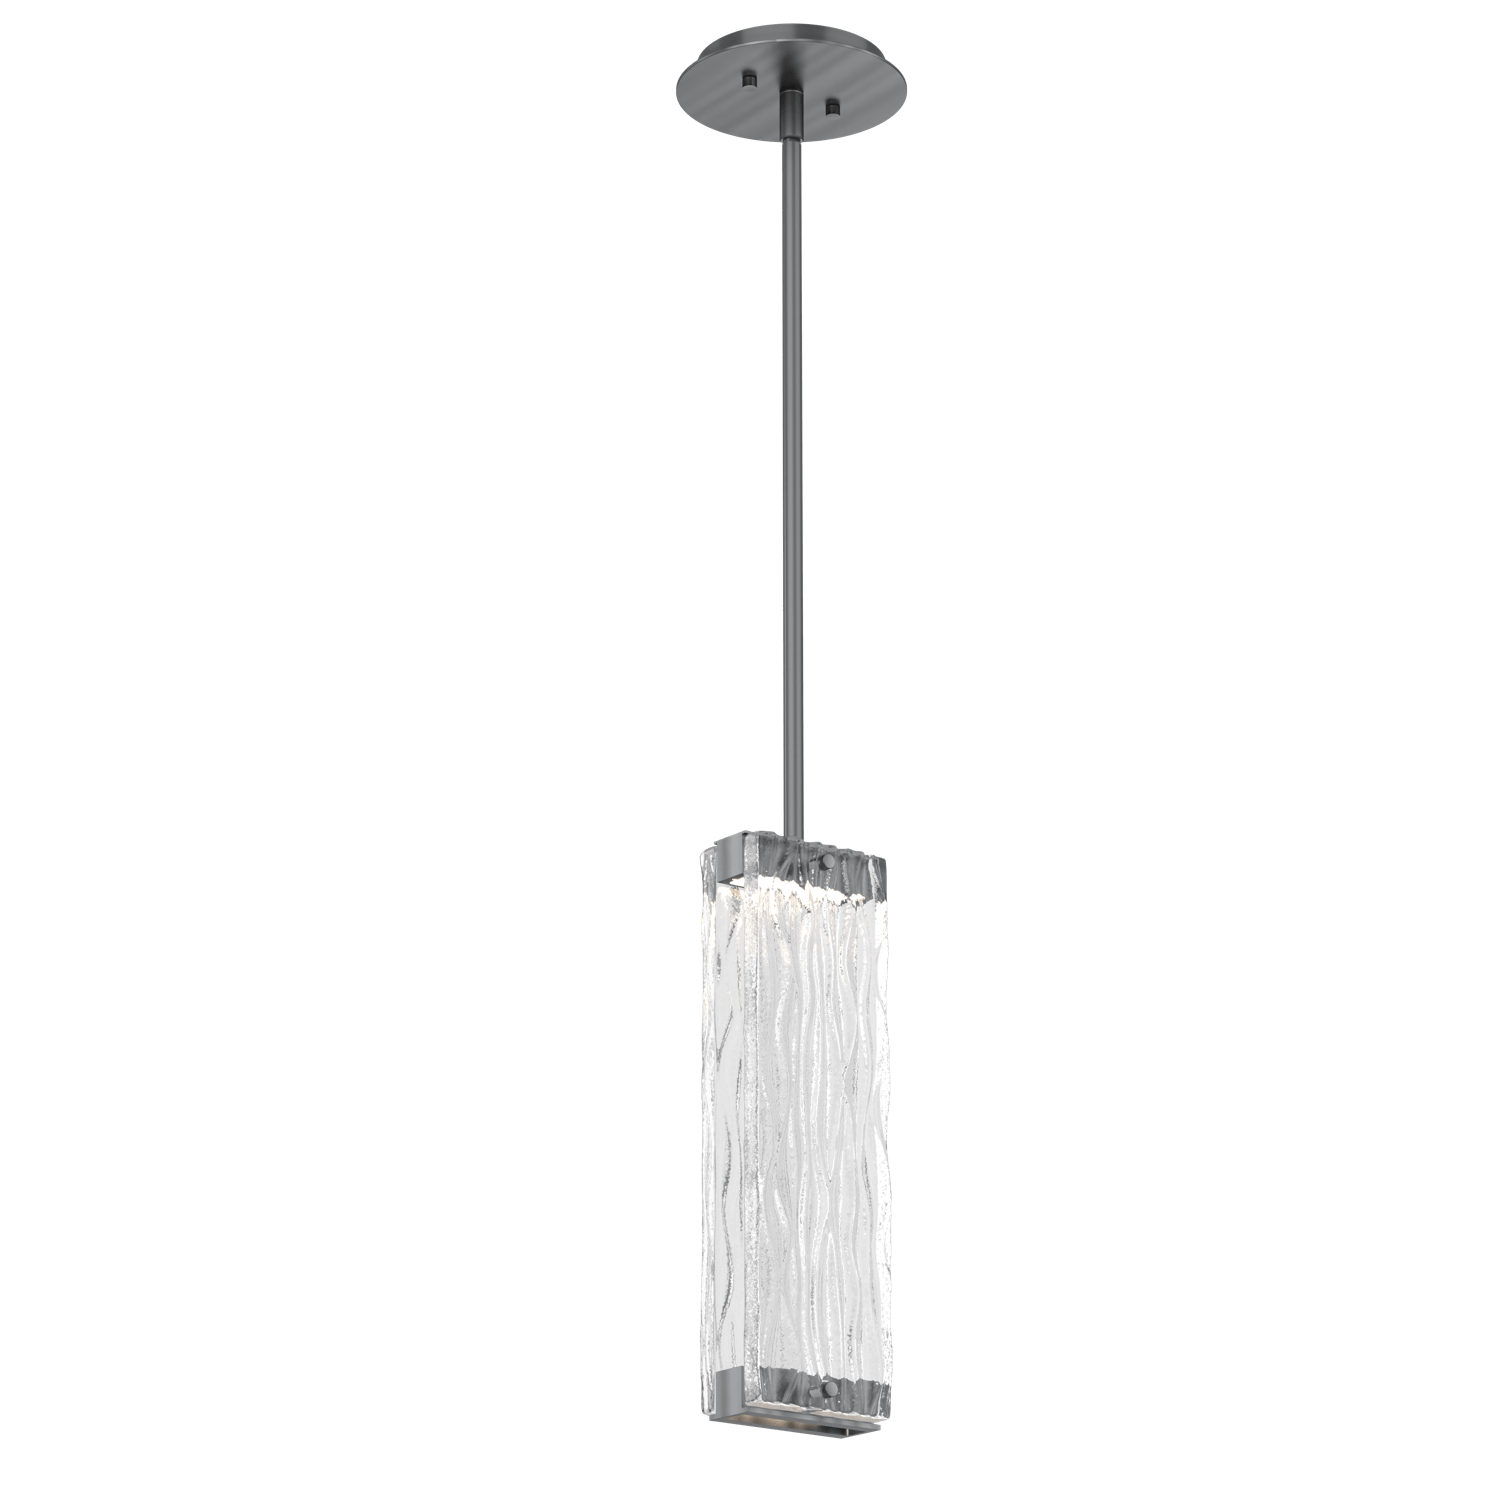 LAB0090-01-GM-TT-Hammerton-Studio-Tabulo-pendant-light-with-gunmetal-finish-and-clear-tidal-cast-glass-shade-and-LED-lamping